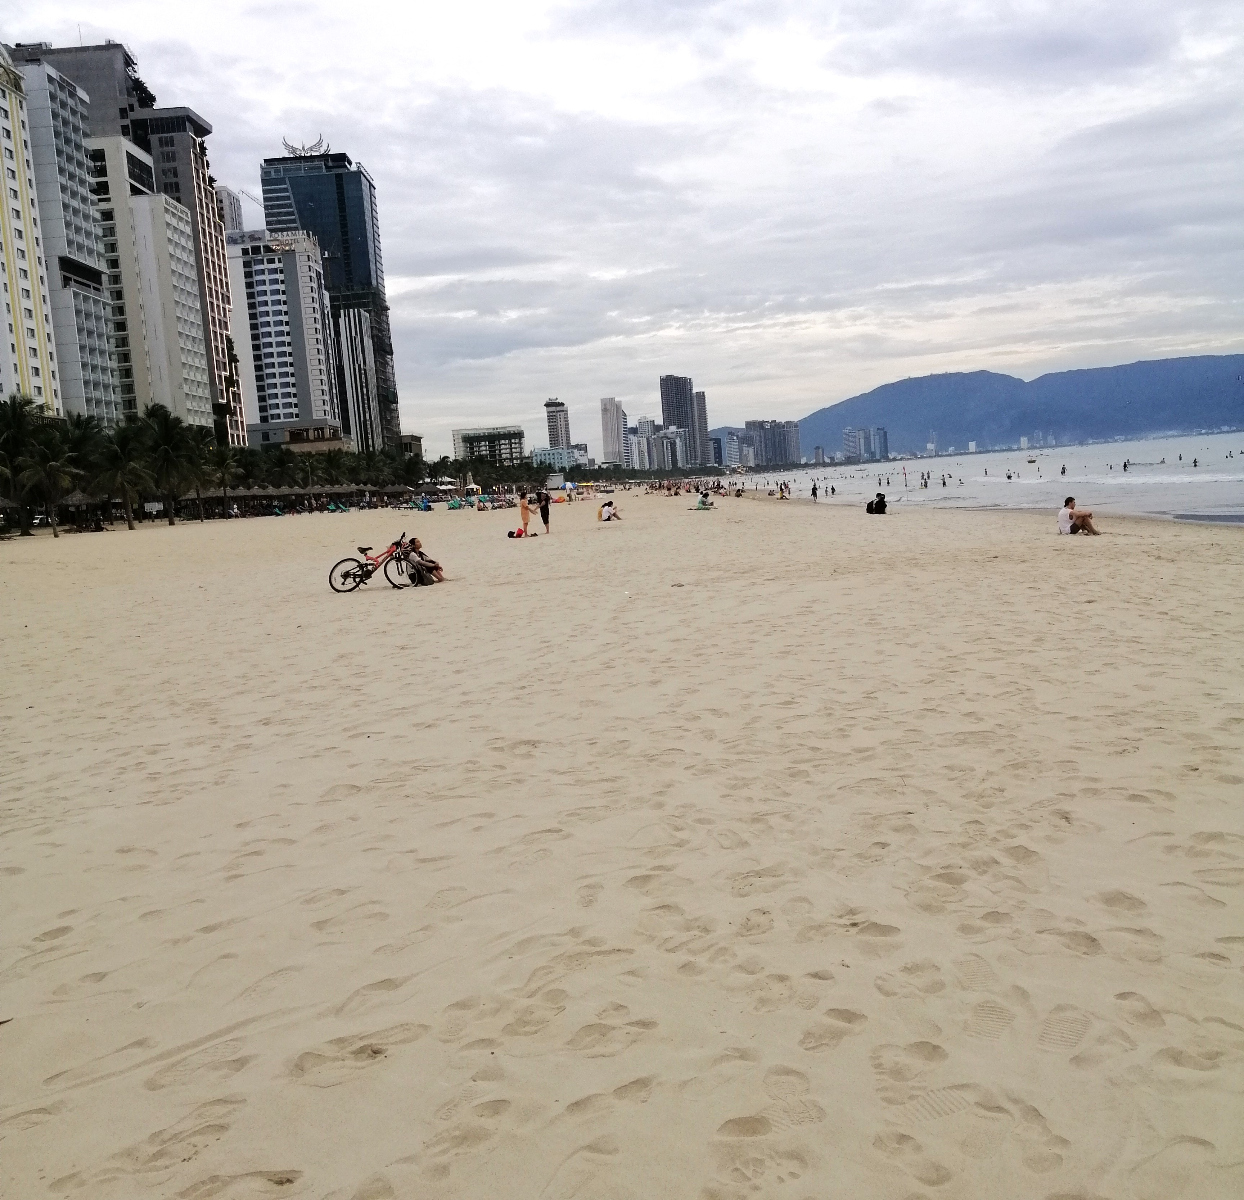 Lots of luxurisouly thick sand, buildings, people, cloudy sky, sea and hills at the urban My An Beach in Danang, central Vietnam